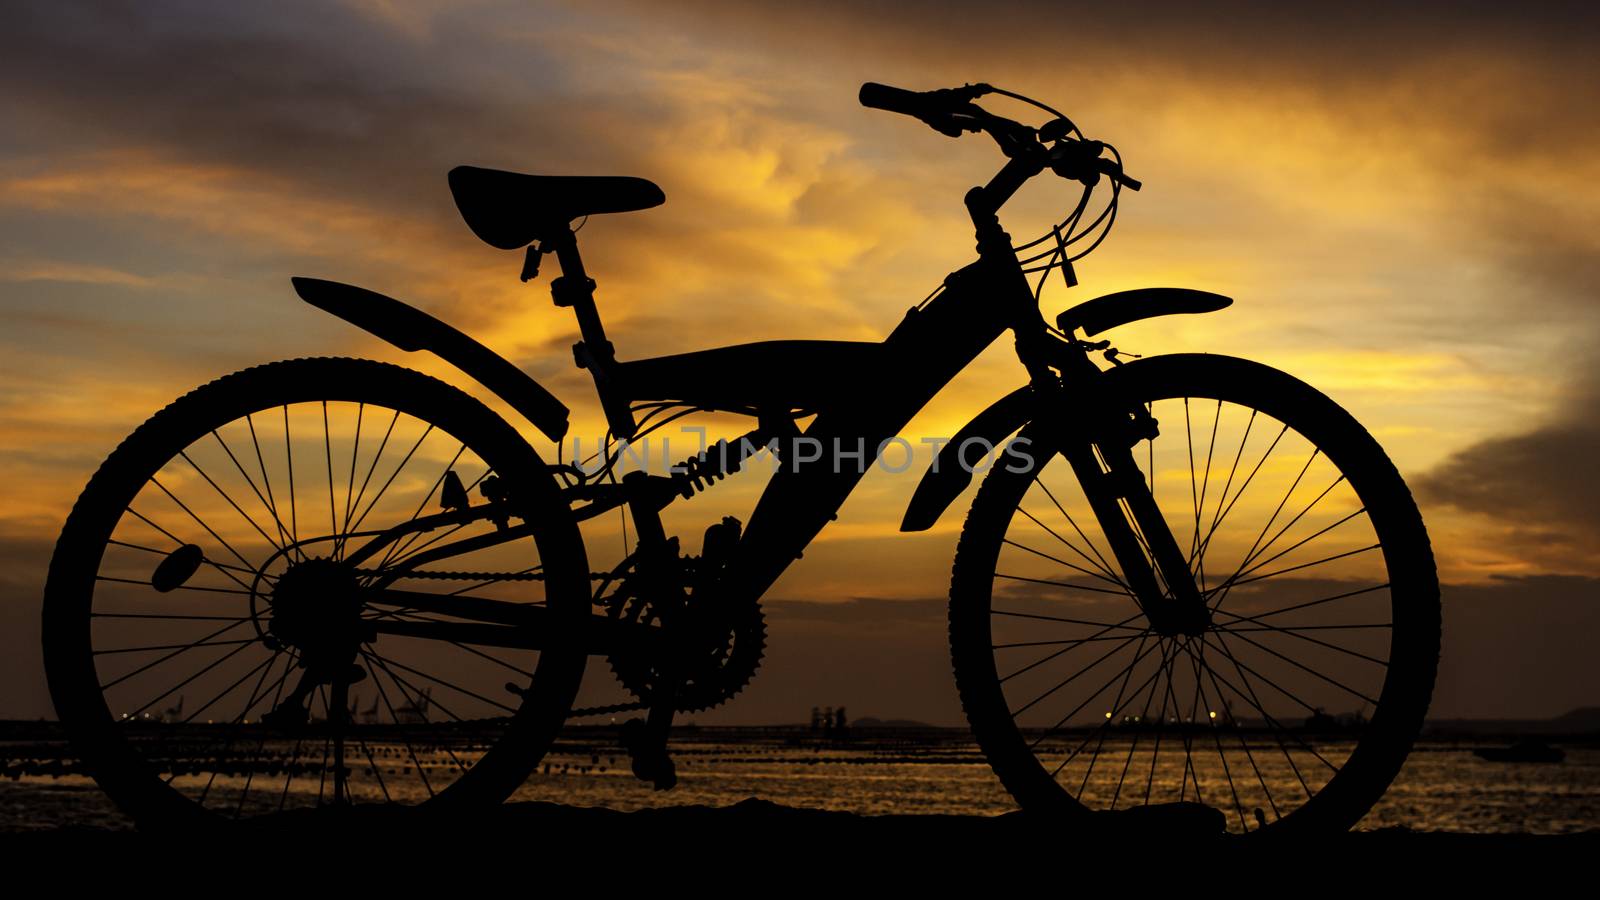 Silhouette of mountain bike with sunset sky beside sea, Thailand